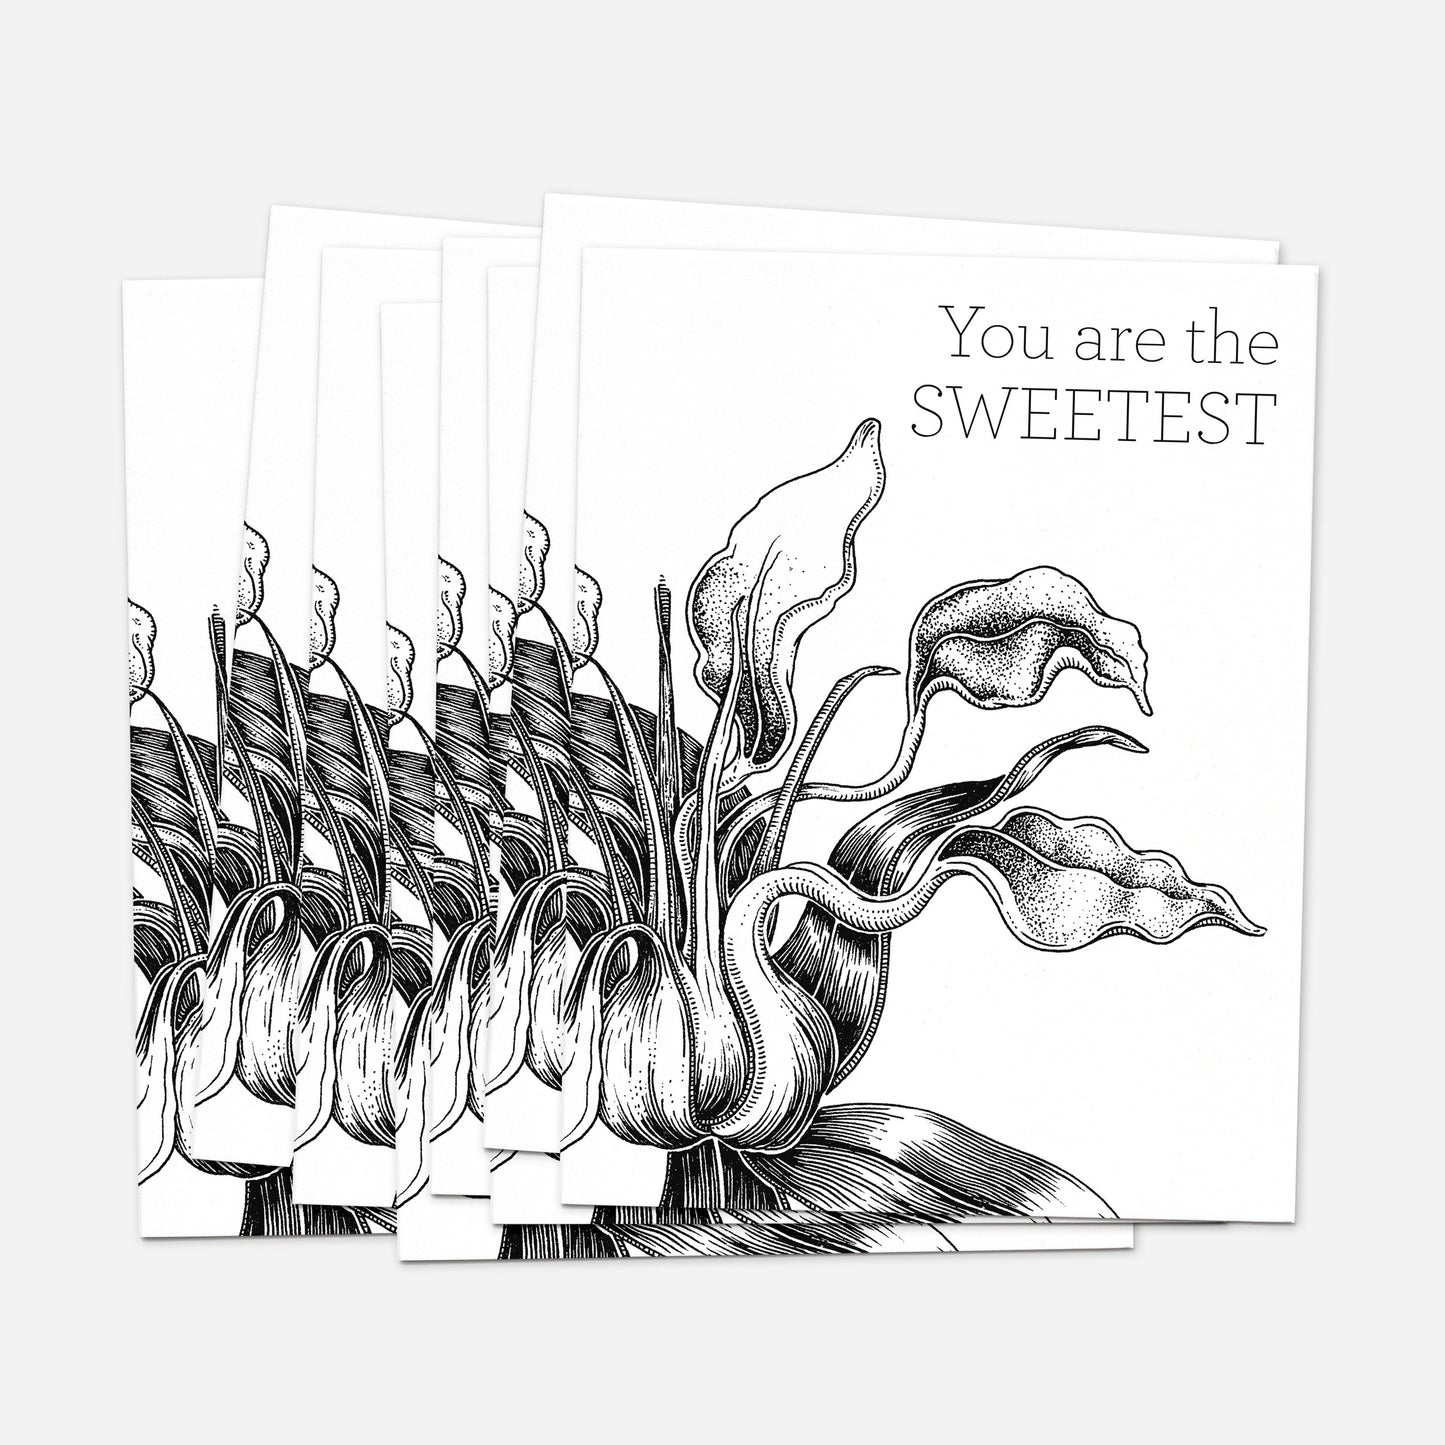 Set of 8 "You Are The Sweetest" Greeting Cards